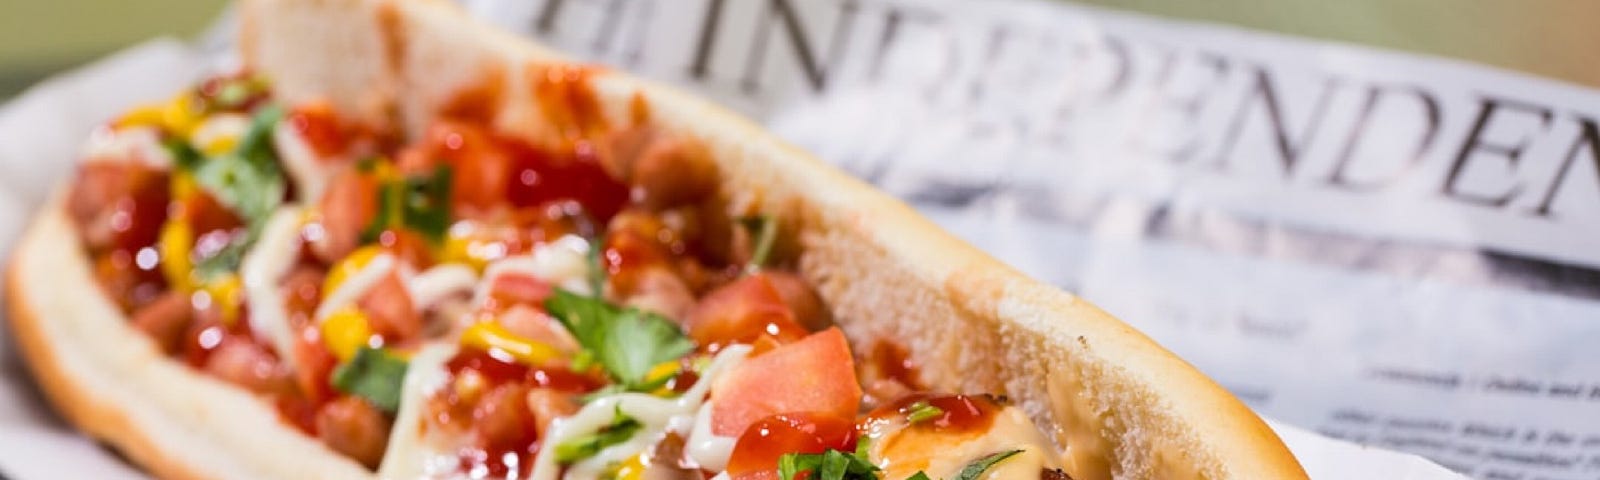 A hot dog topped with cheese, tomatoes, onions, green onions, ketchup and mustard.